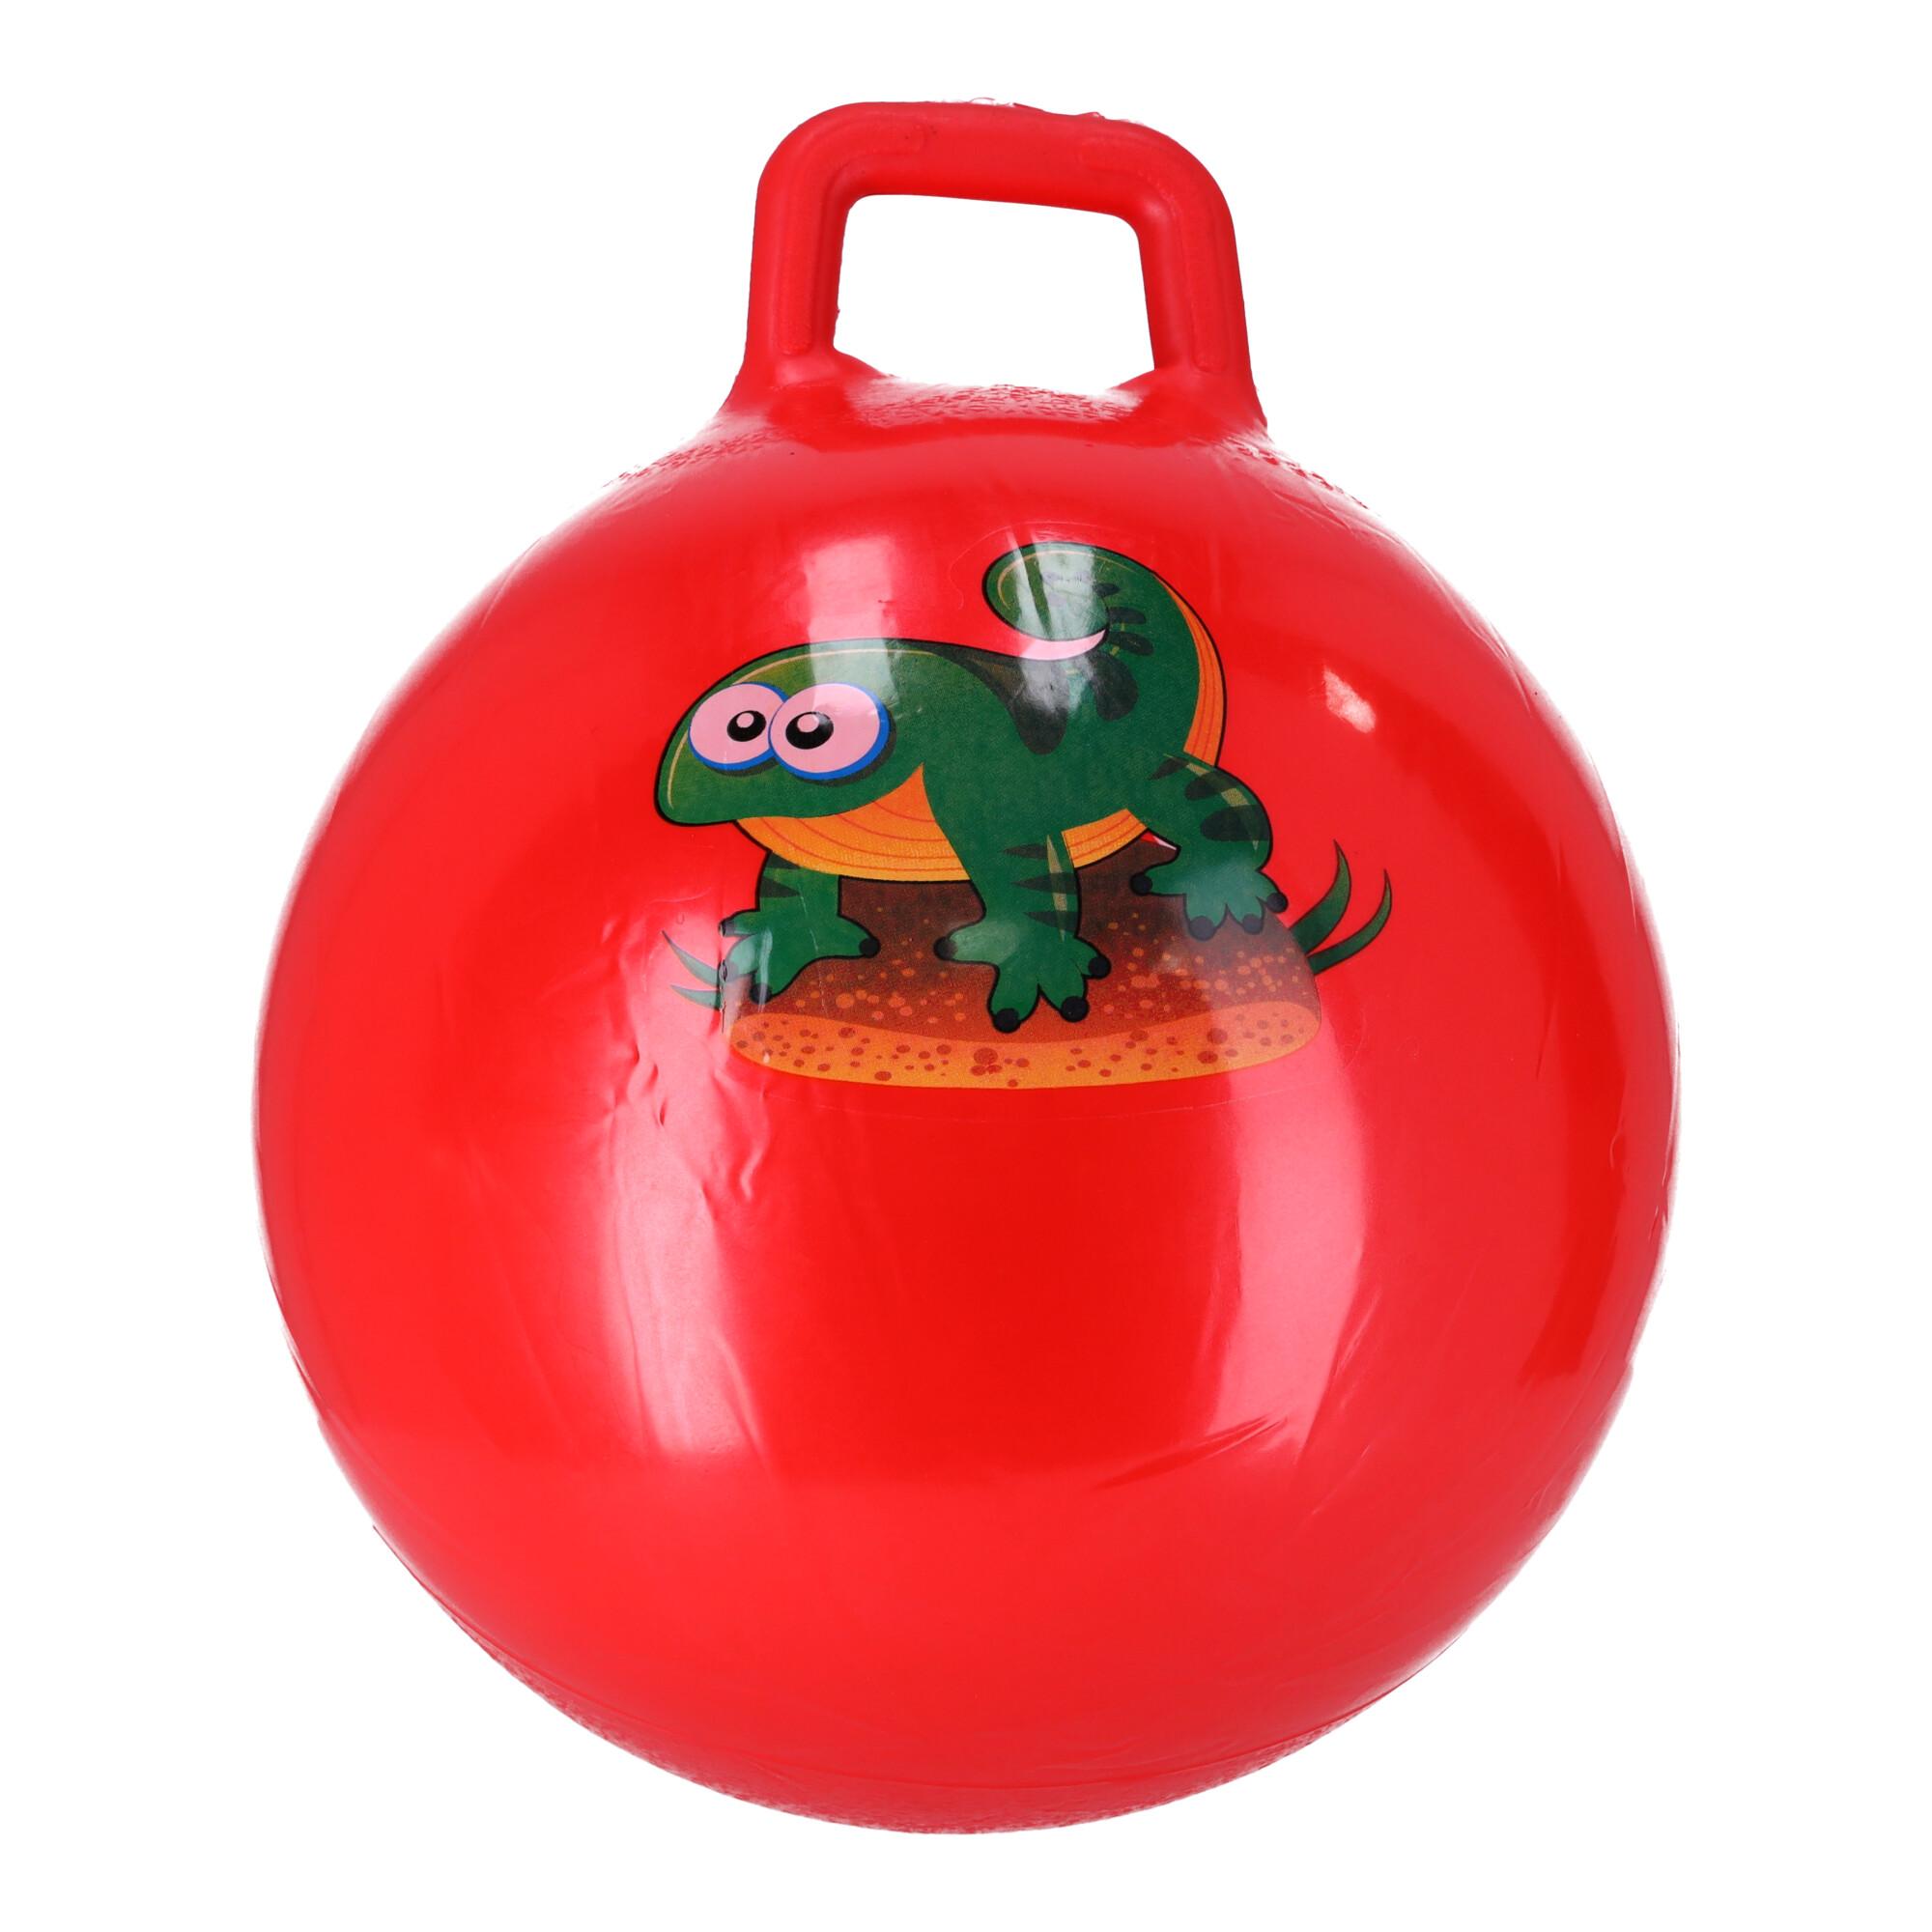 Jumping ball, jumper for children with handles - red